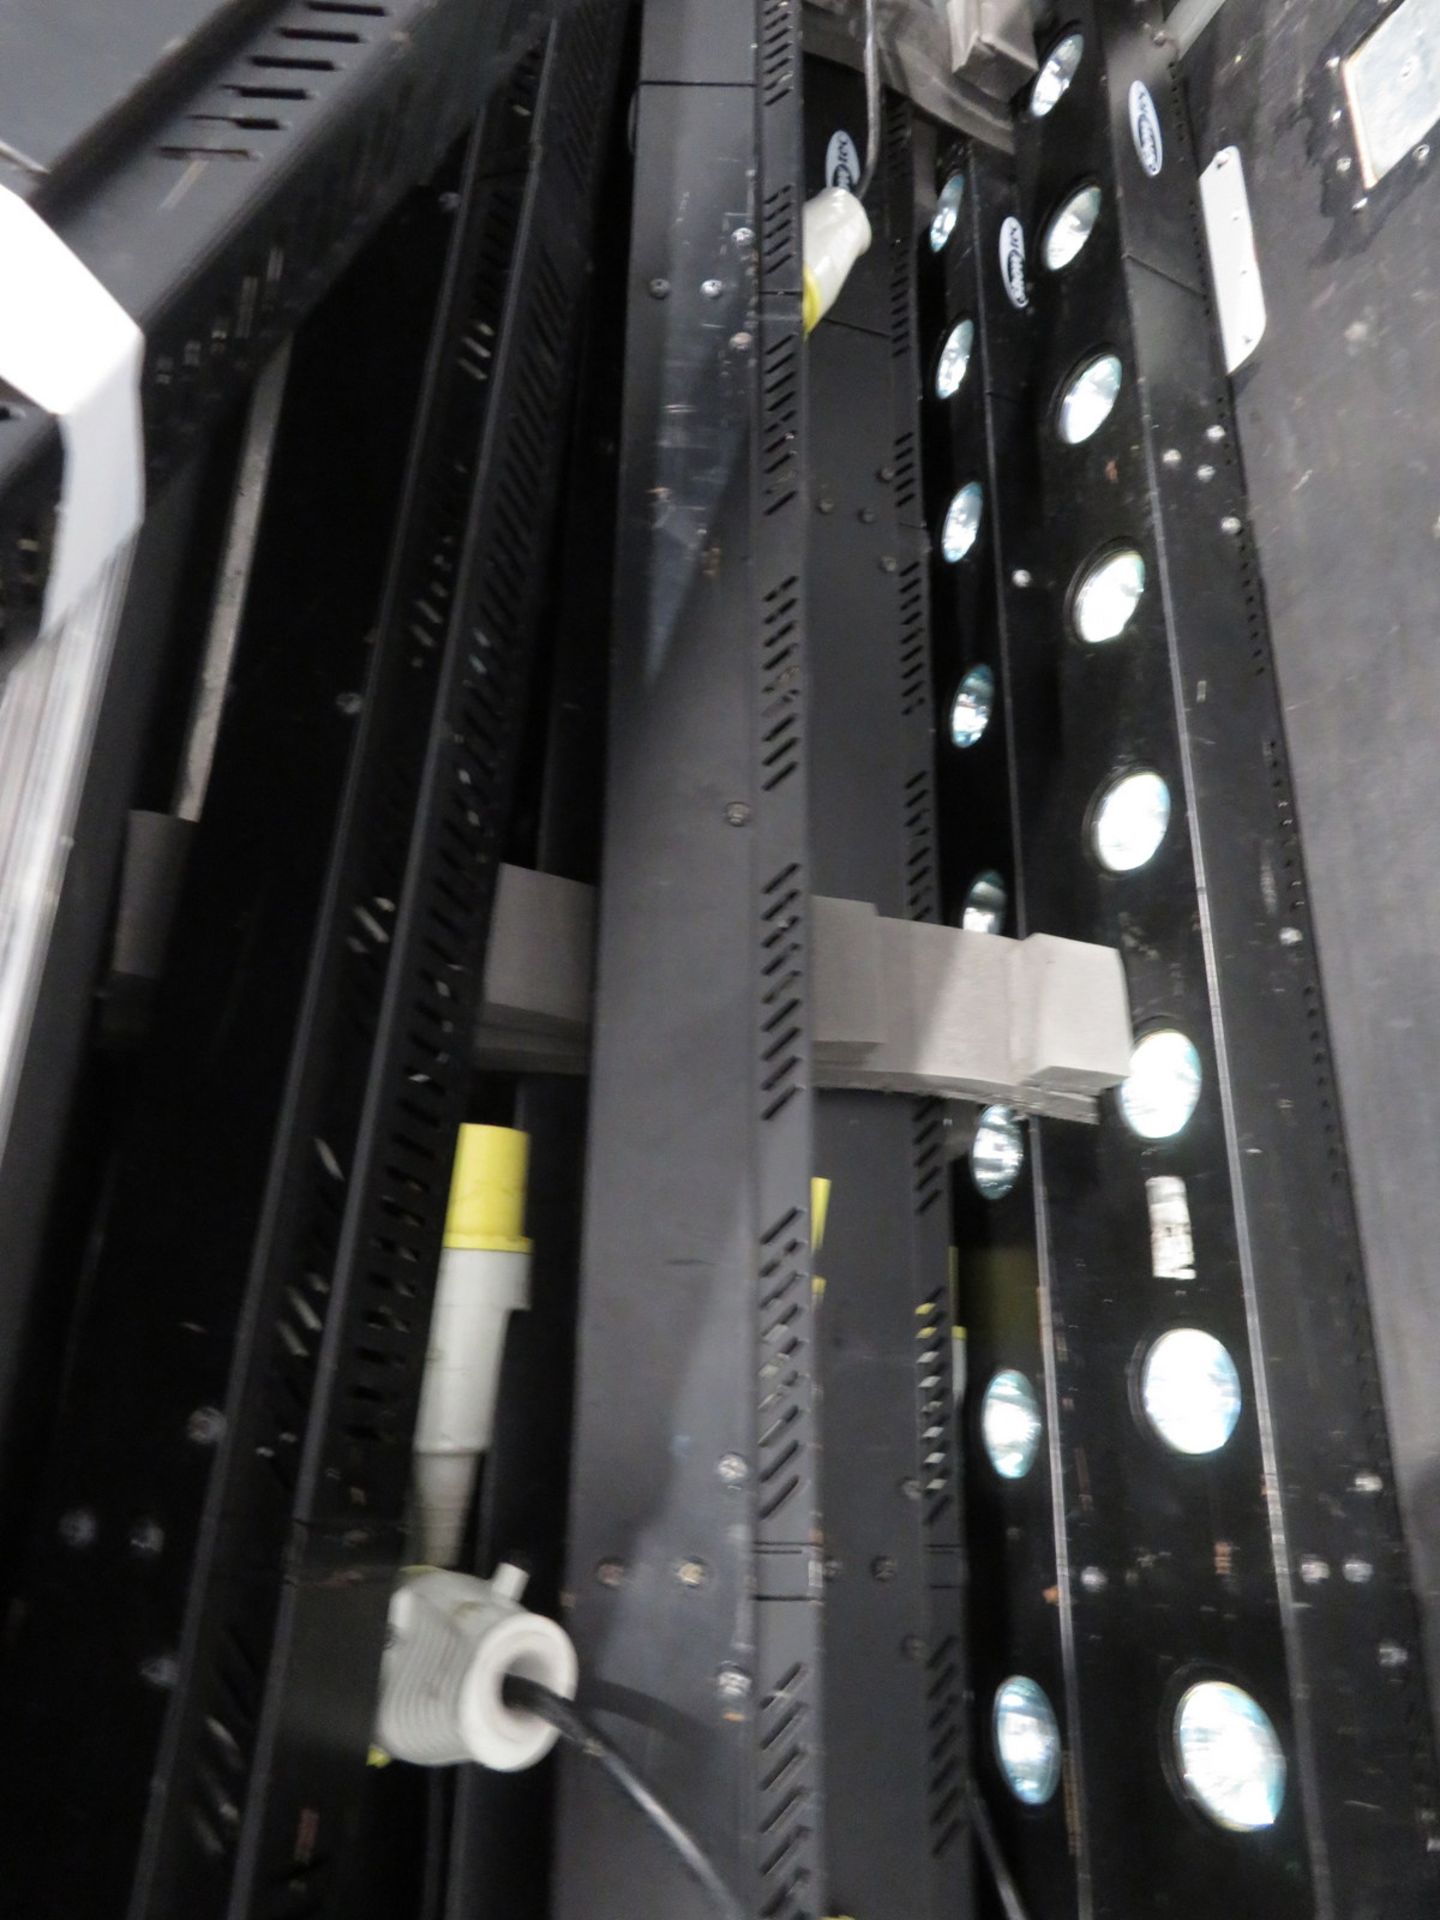 12x Showtec 110v Sunstrip in flightcase. Complete with brackets and cable. Working conditi - Image 8 of 11